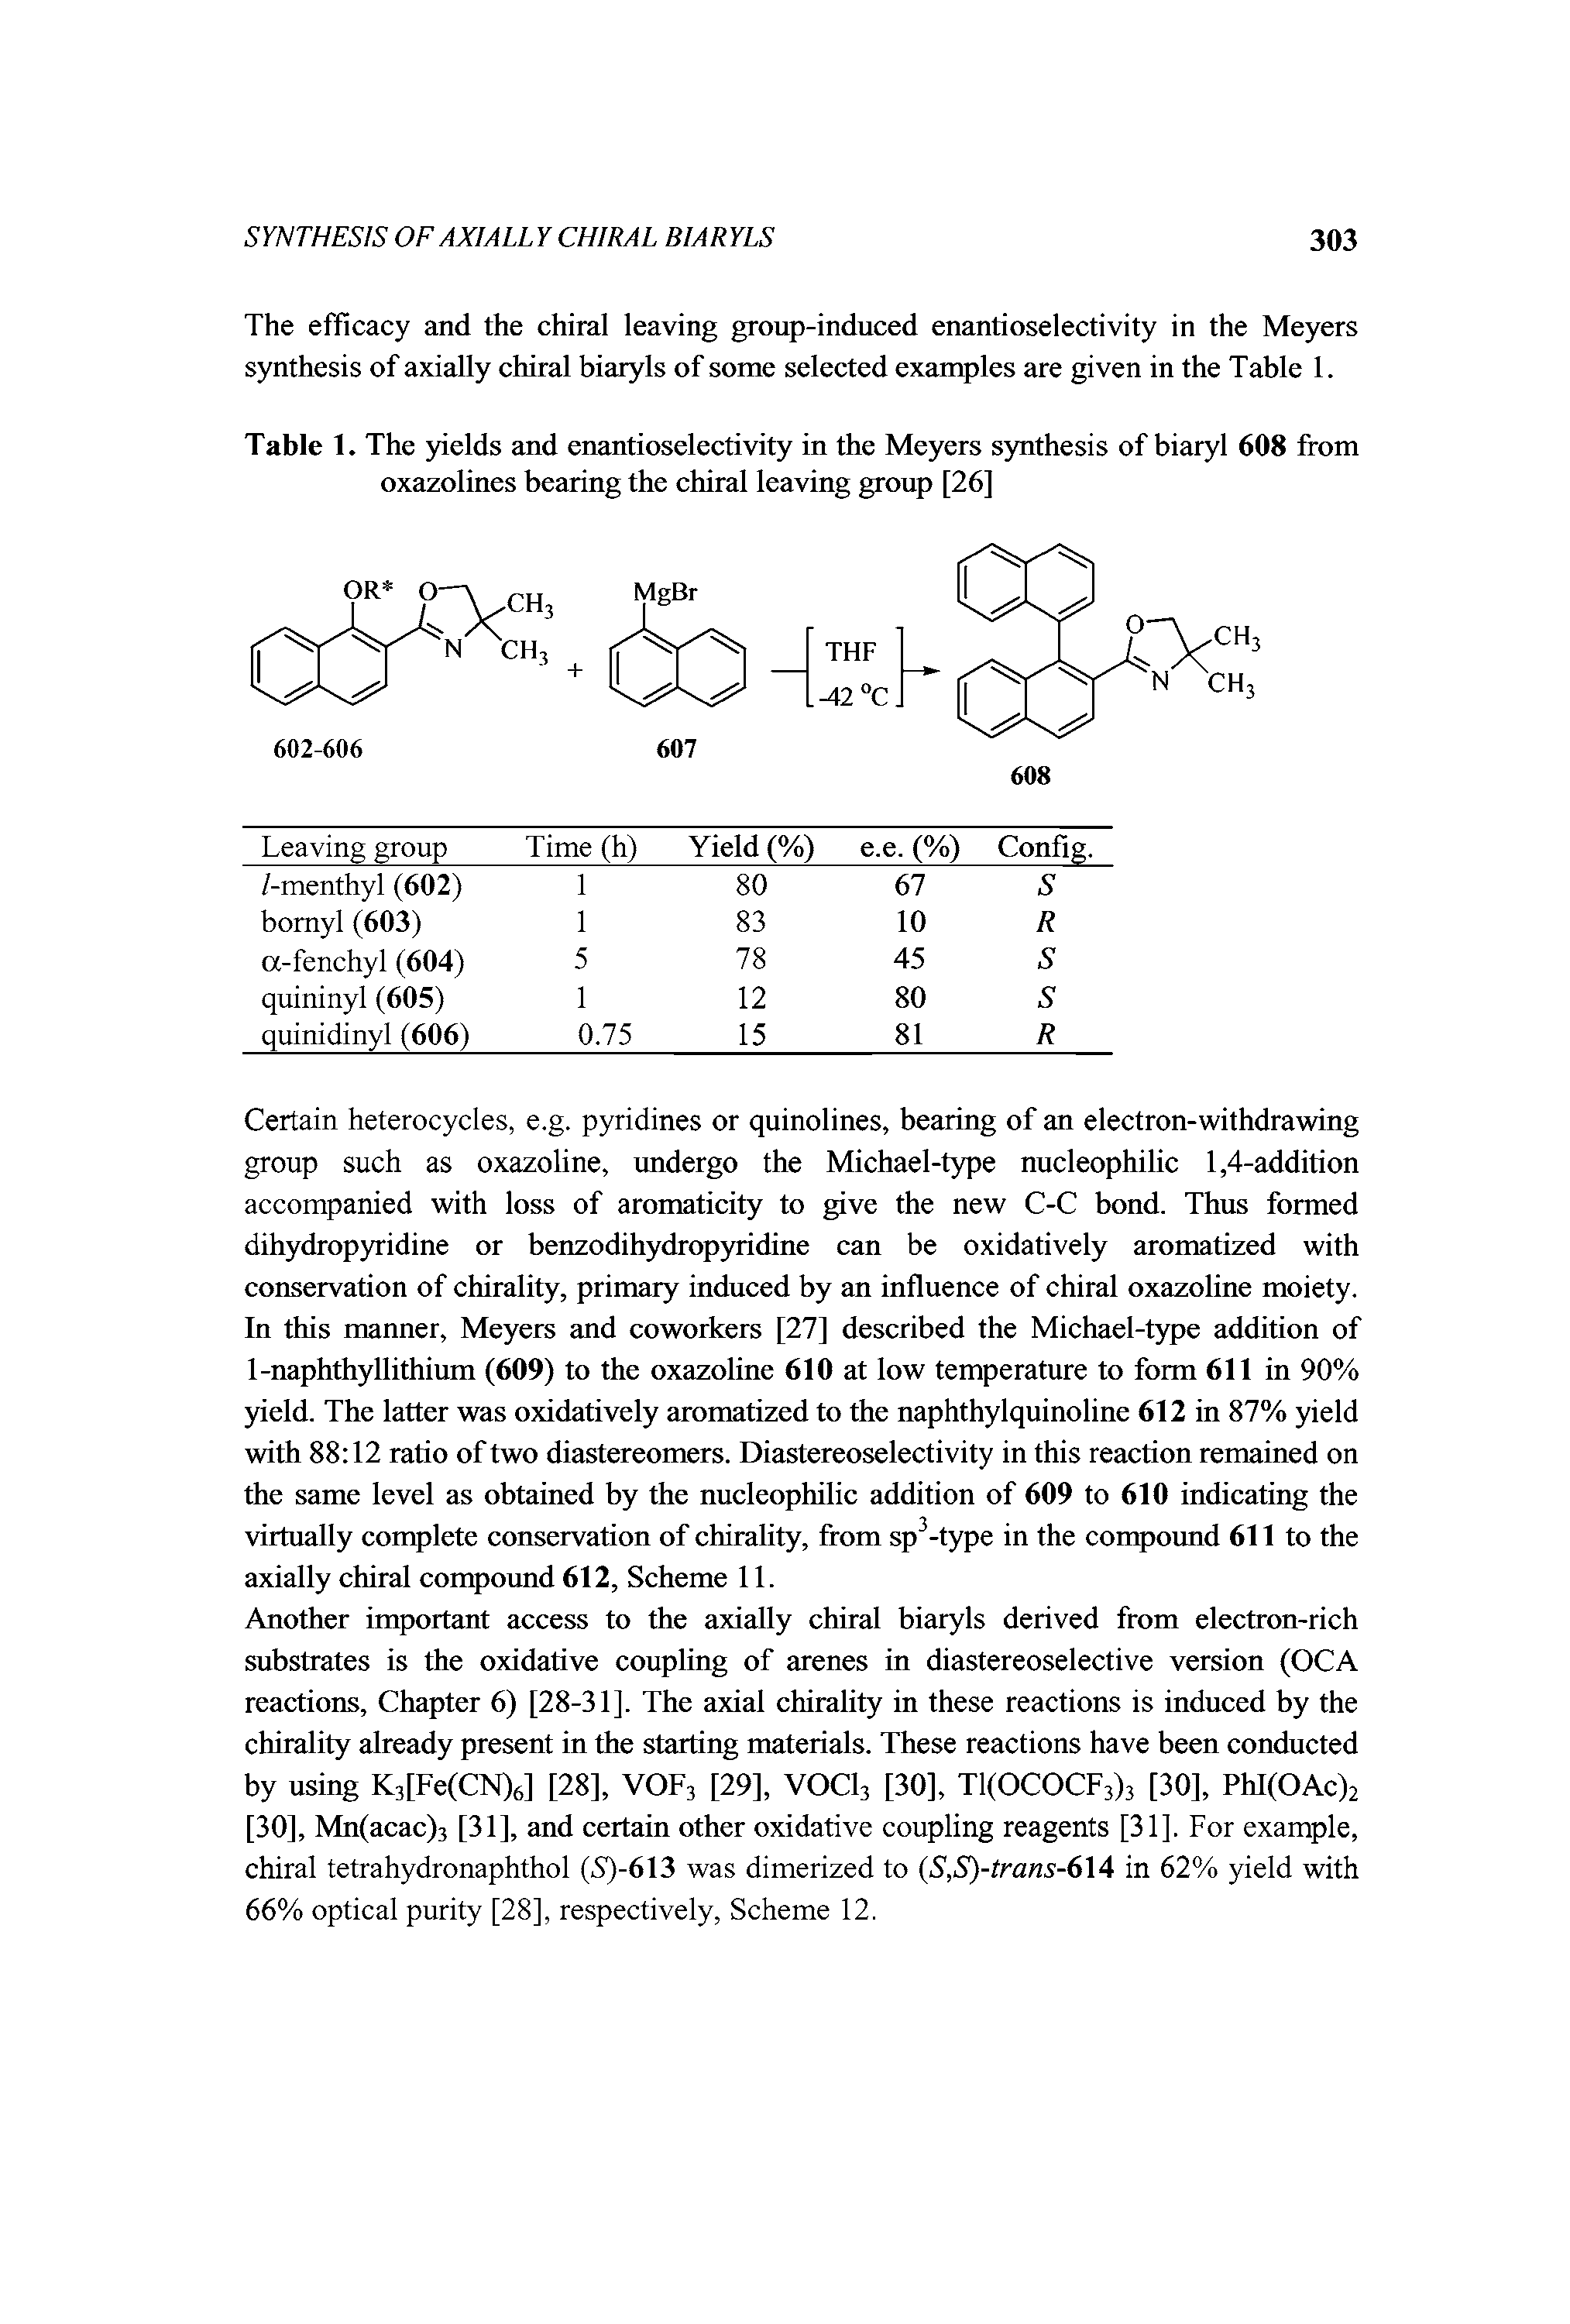 Table 1. The yields and enantioselectivity in the Meyers synthesis of biaryl 608 from oxazolines bearing the chiral leaving group [26]...